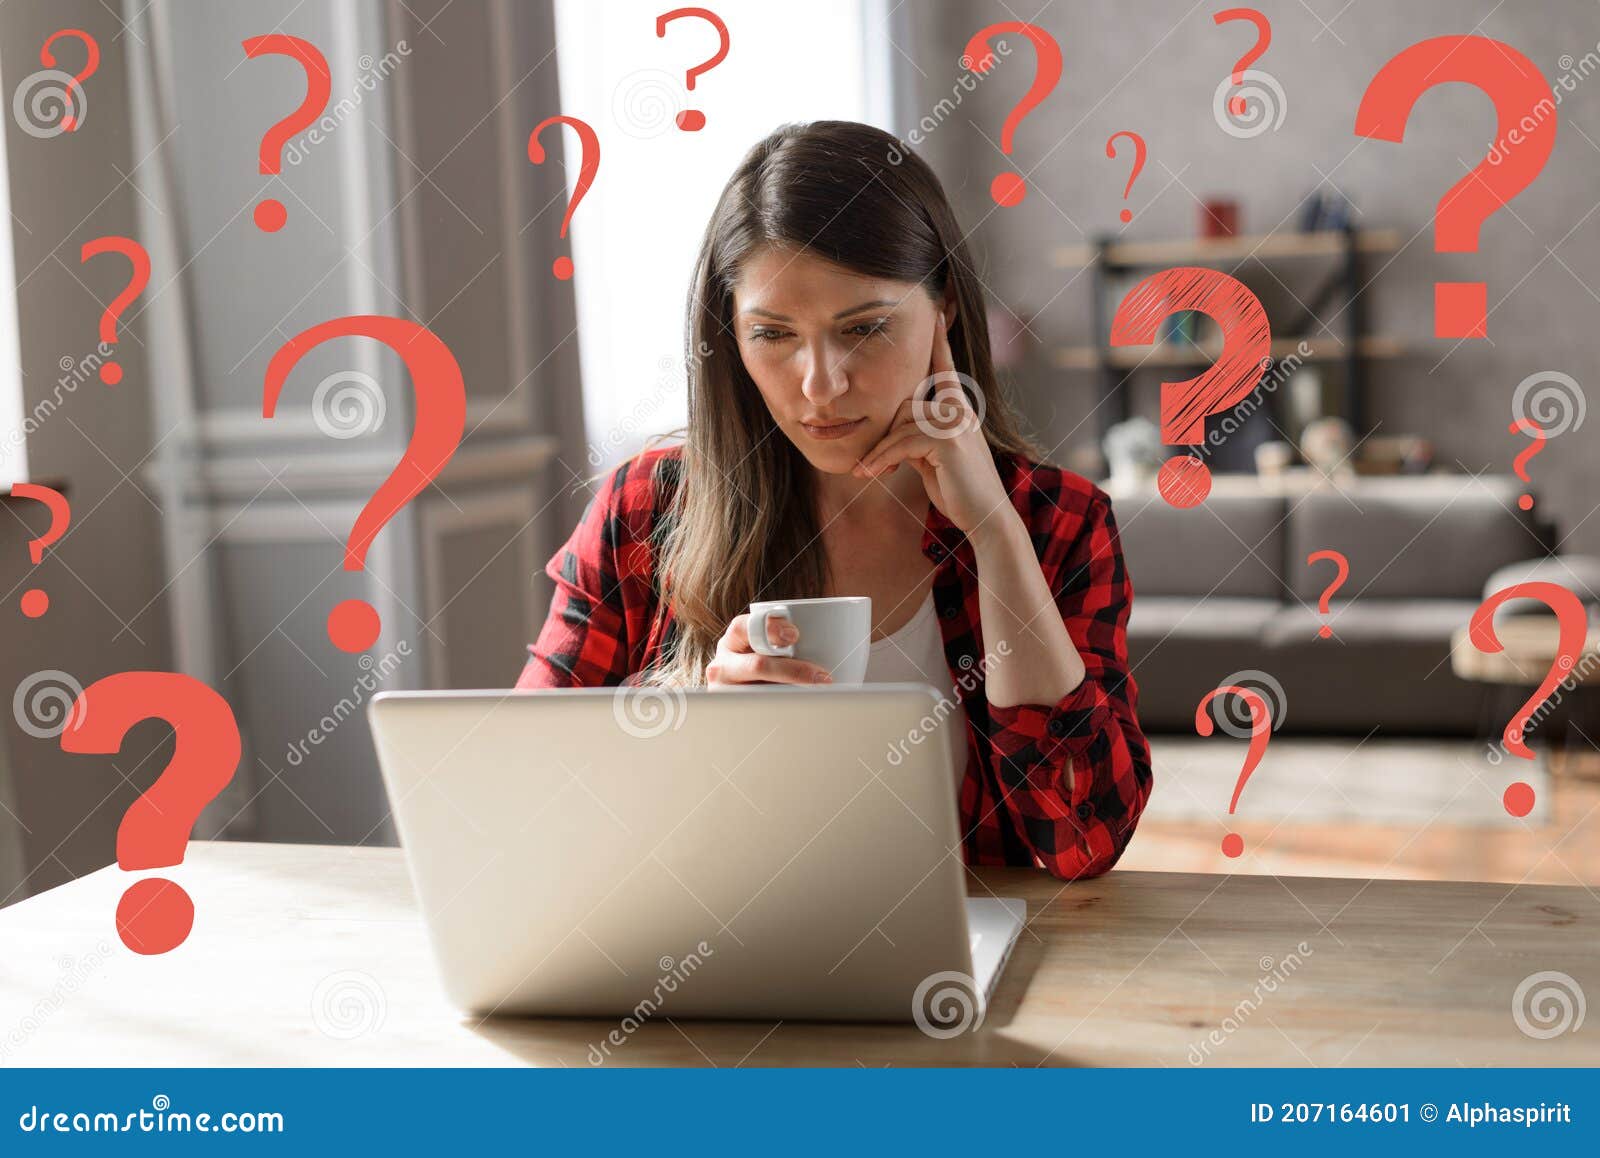 woman teleworker works at home with a laptop but has some questions